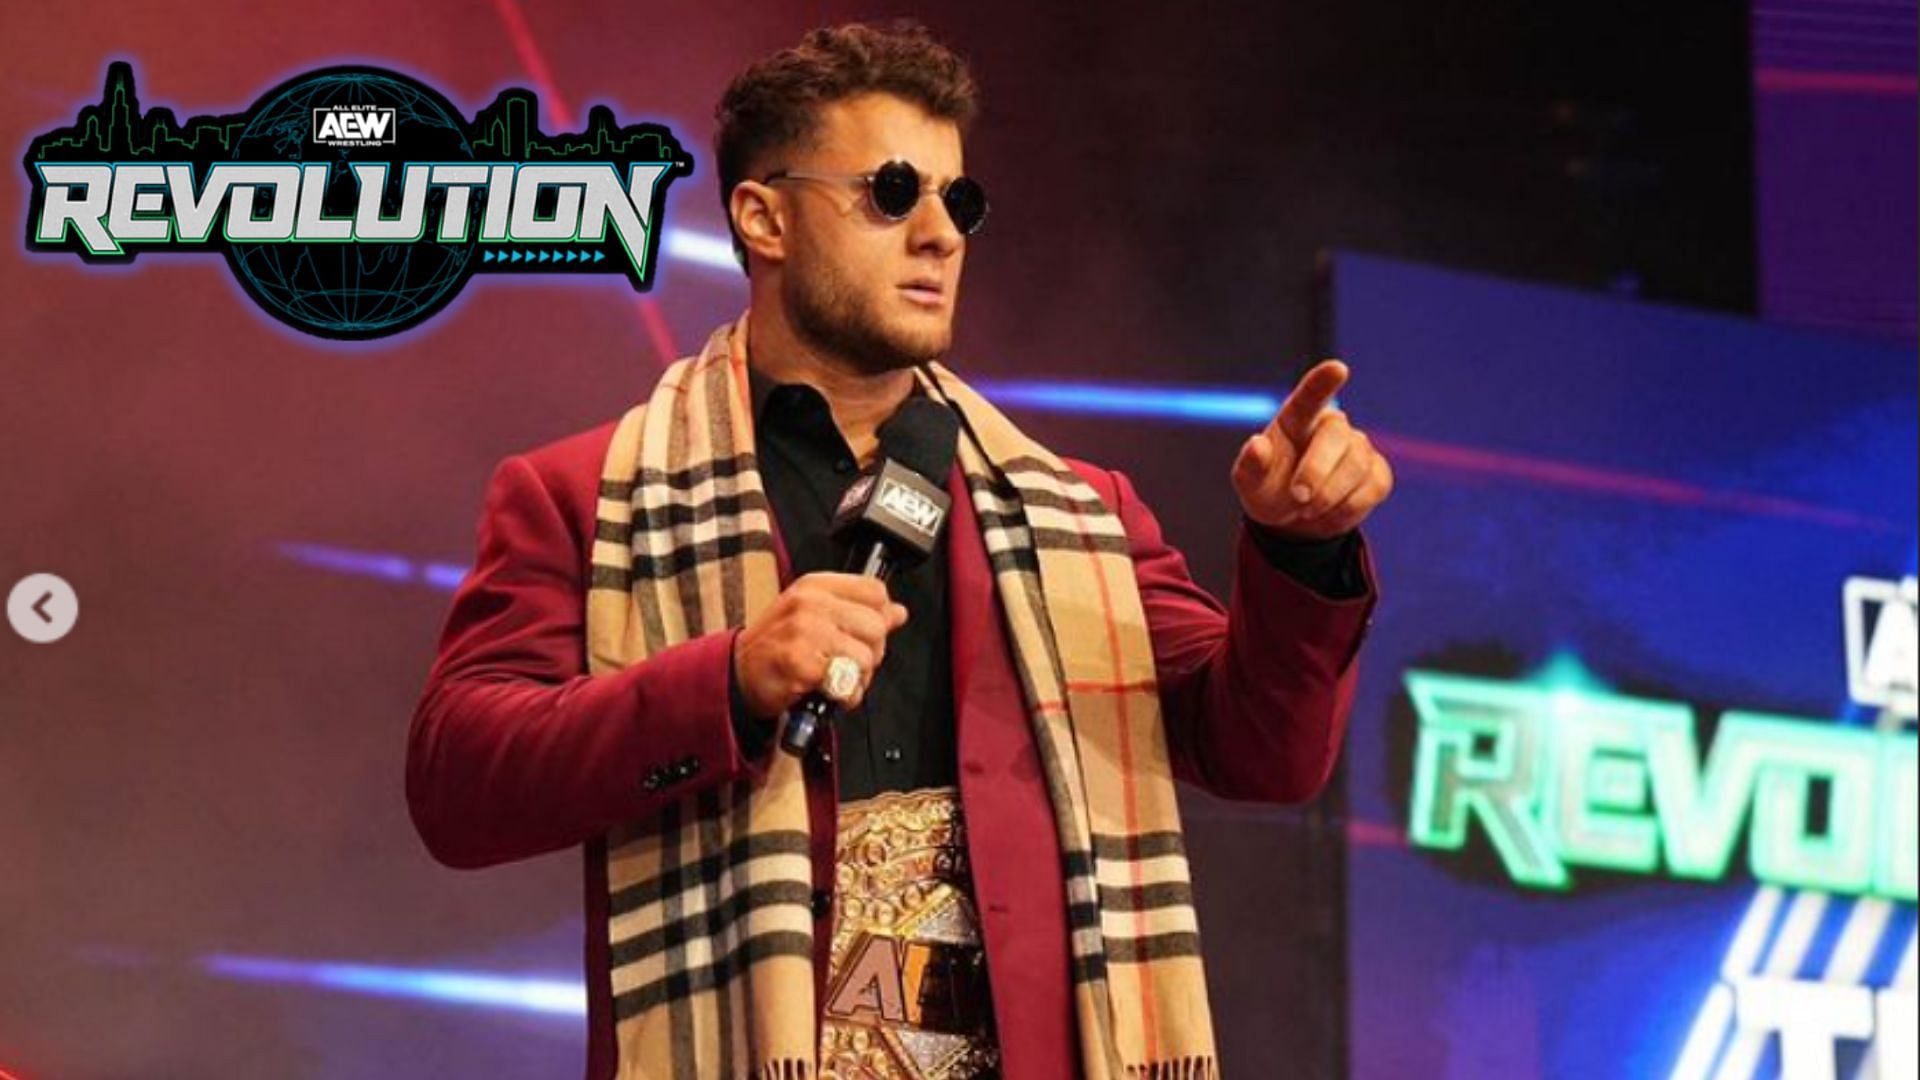 MJF recently received a threatening message from another AEW star